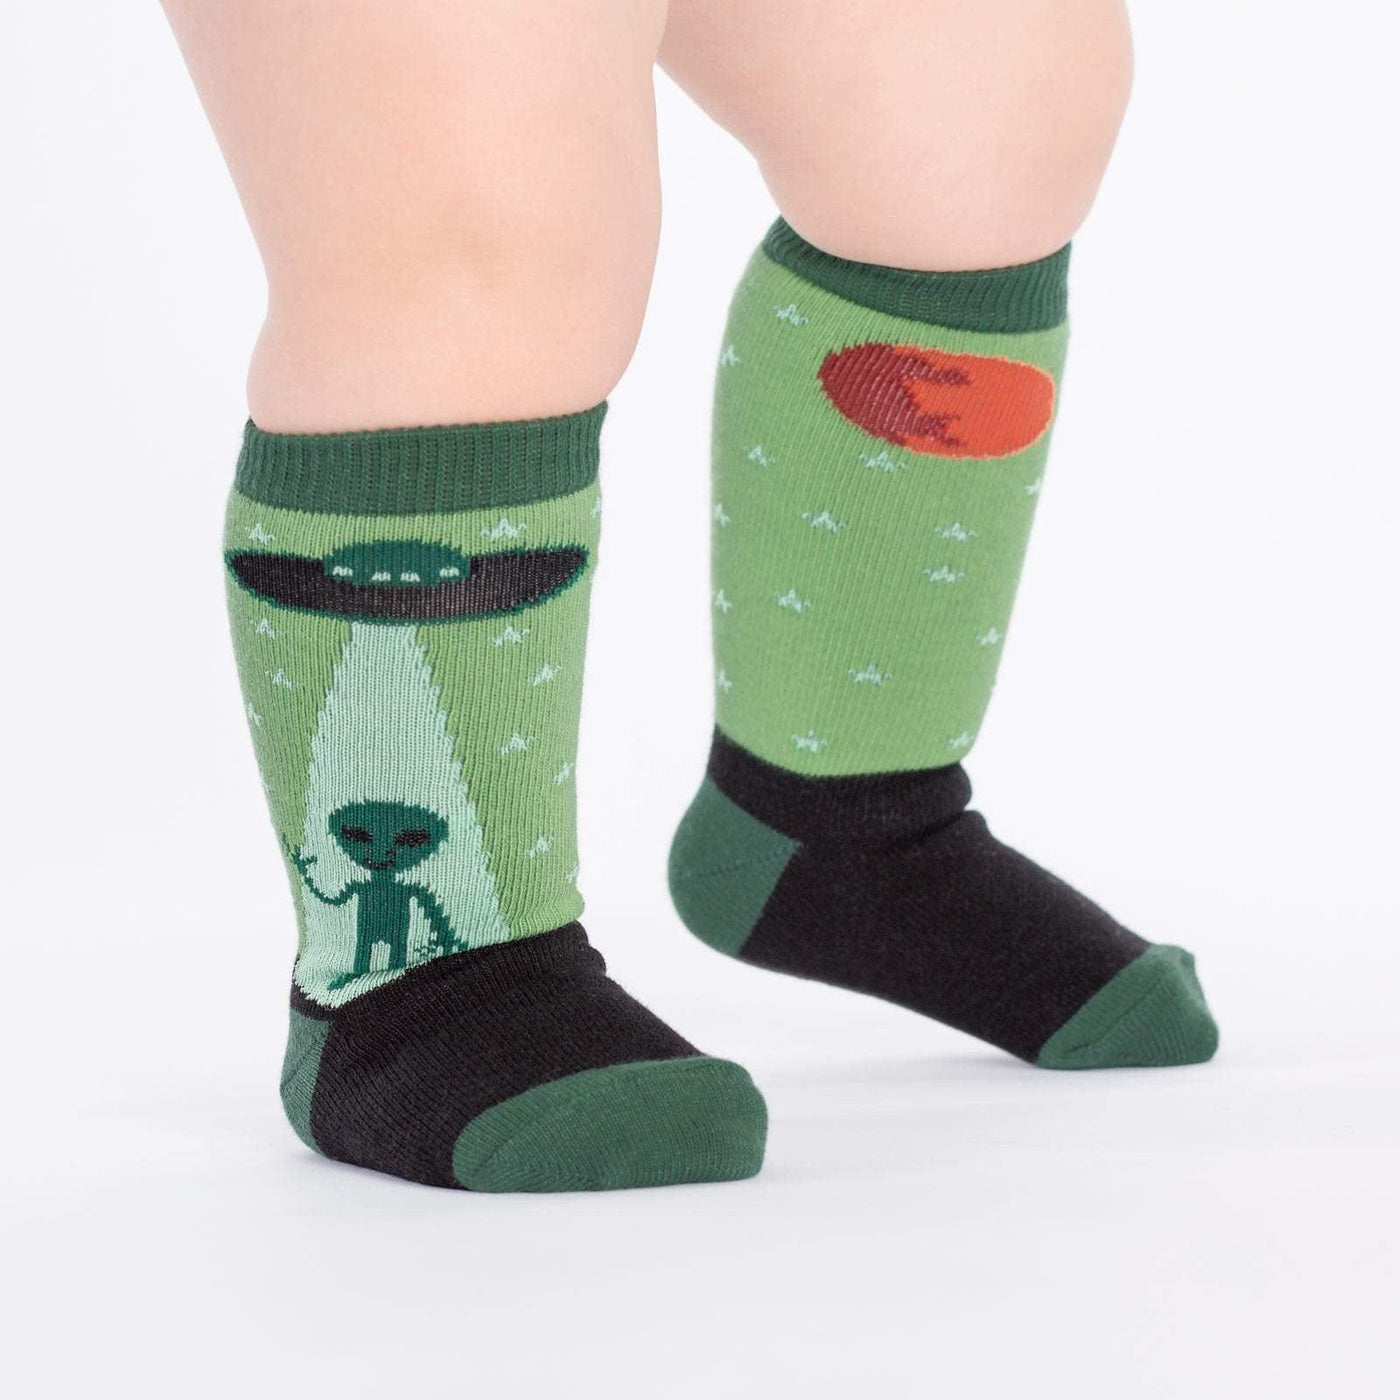 I Believe, Toddler Knee-high - Sock It To Me - The Sock Monster